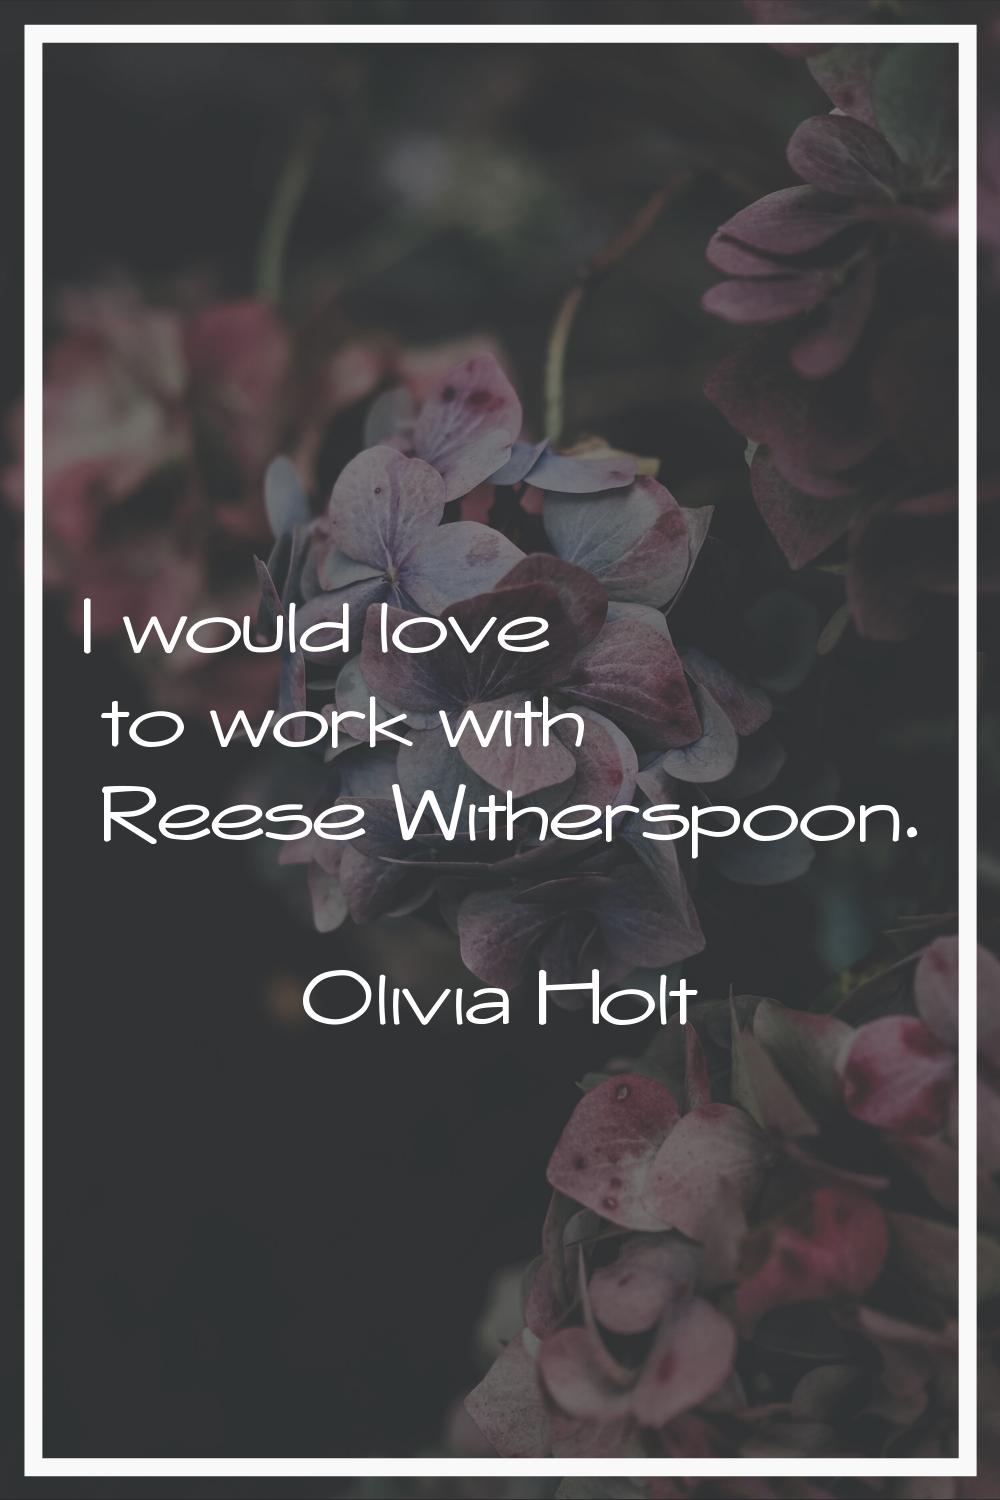 I would love to work with Reese Witherspoon.